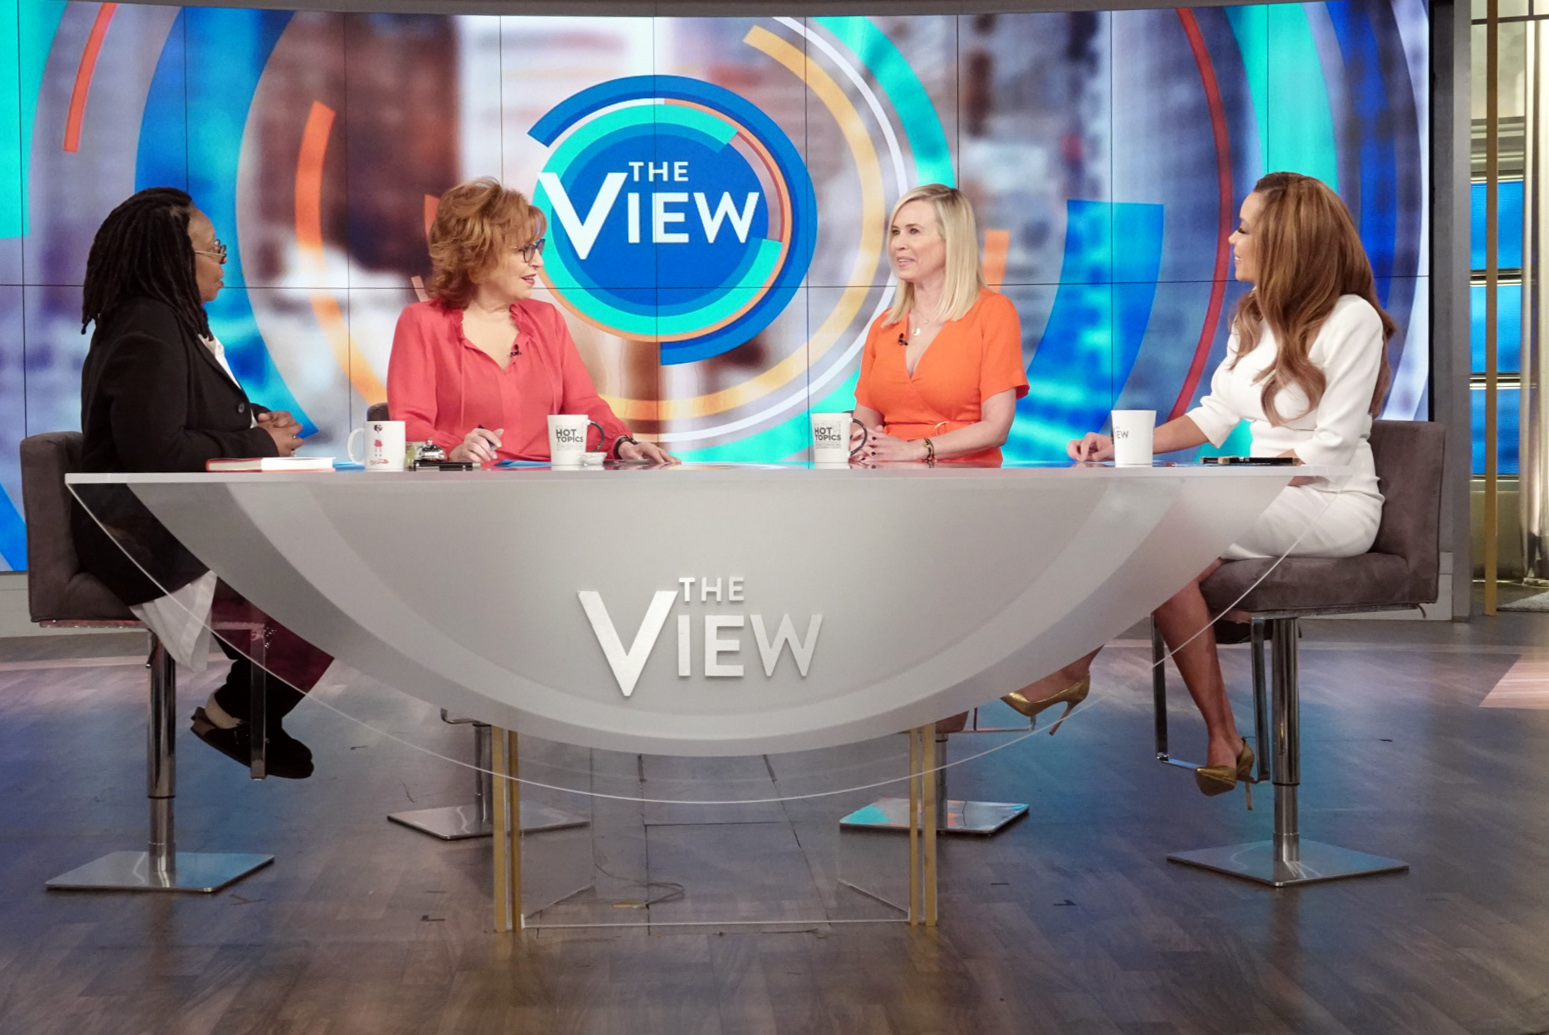 PHOTO: Comedian Chelsea Handler opens up about what she learned in therapy on "The View" with co-hosts Whoopi Goldberg, Joy Behar, and Sunny Hostin on Tuesday, April 9, 2019.